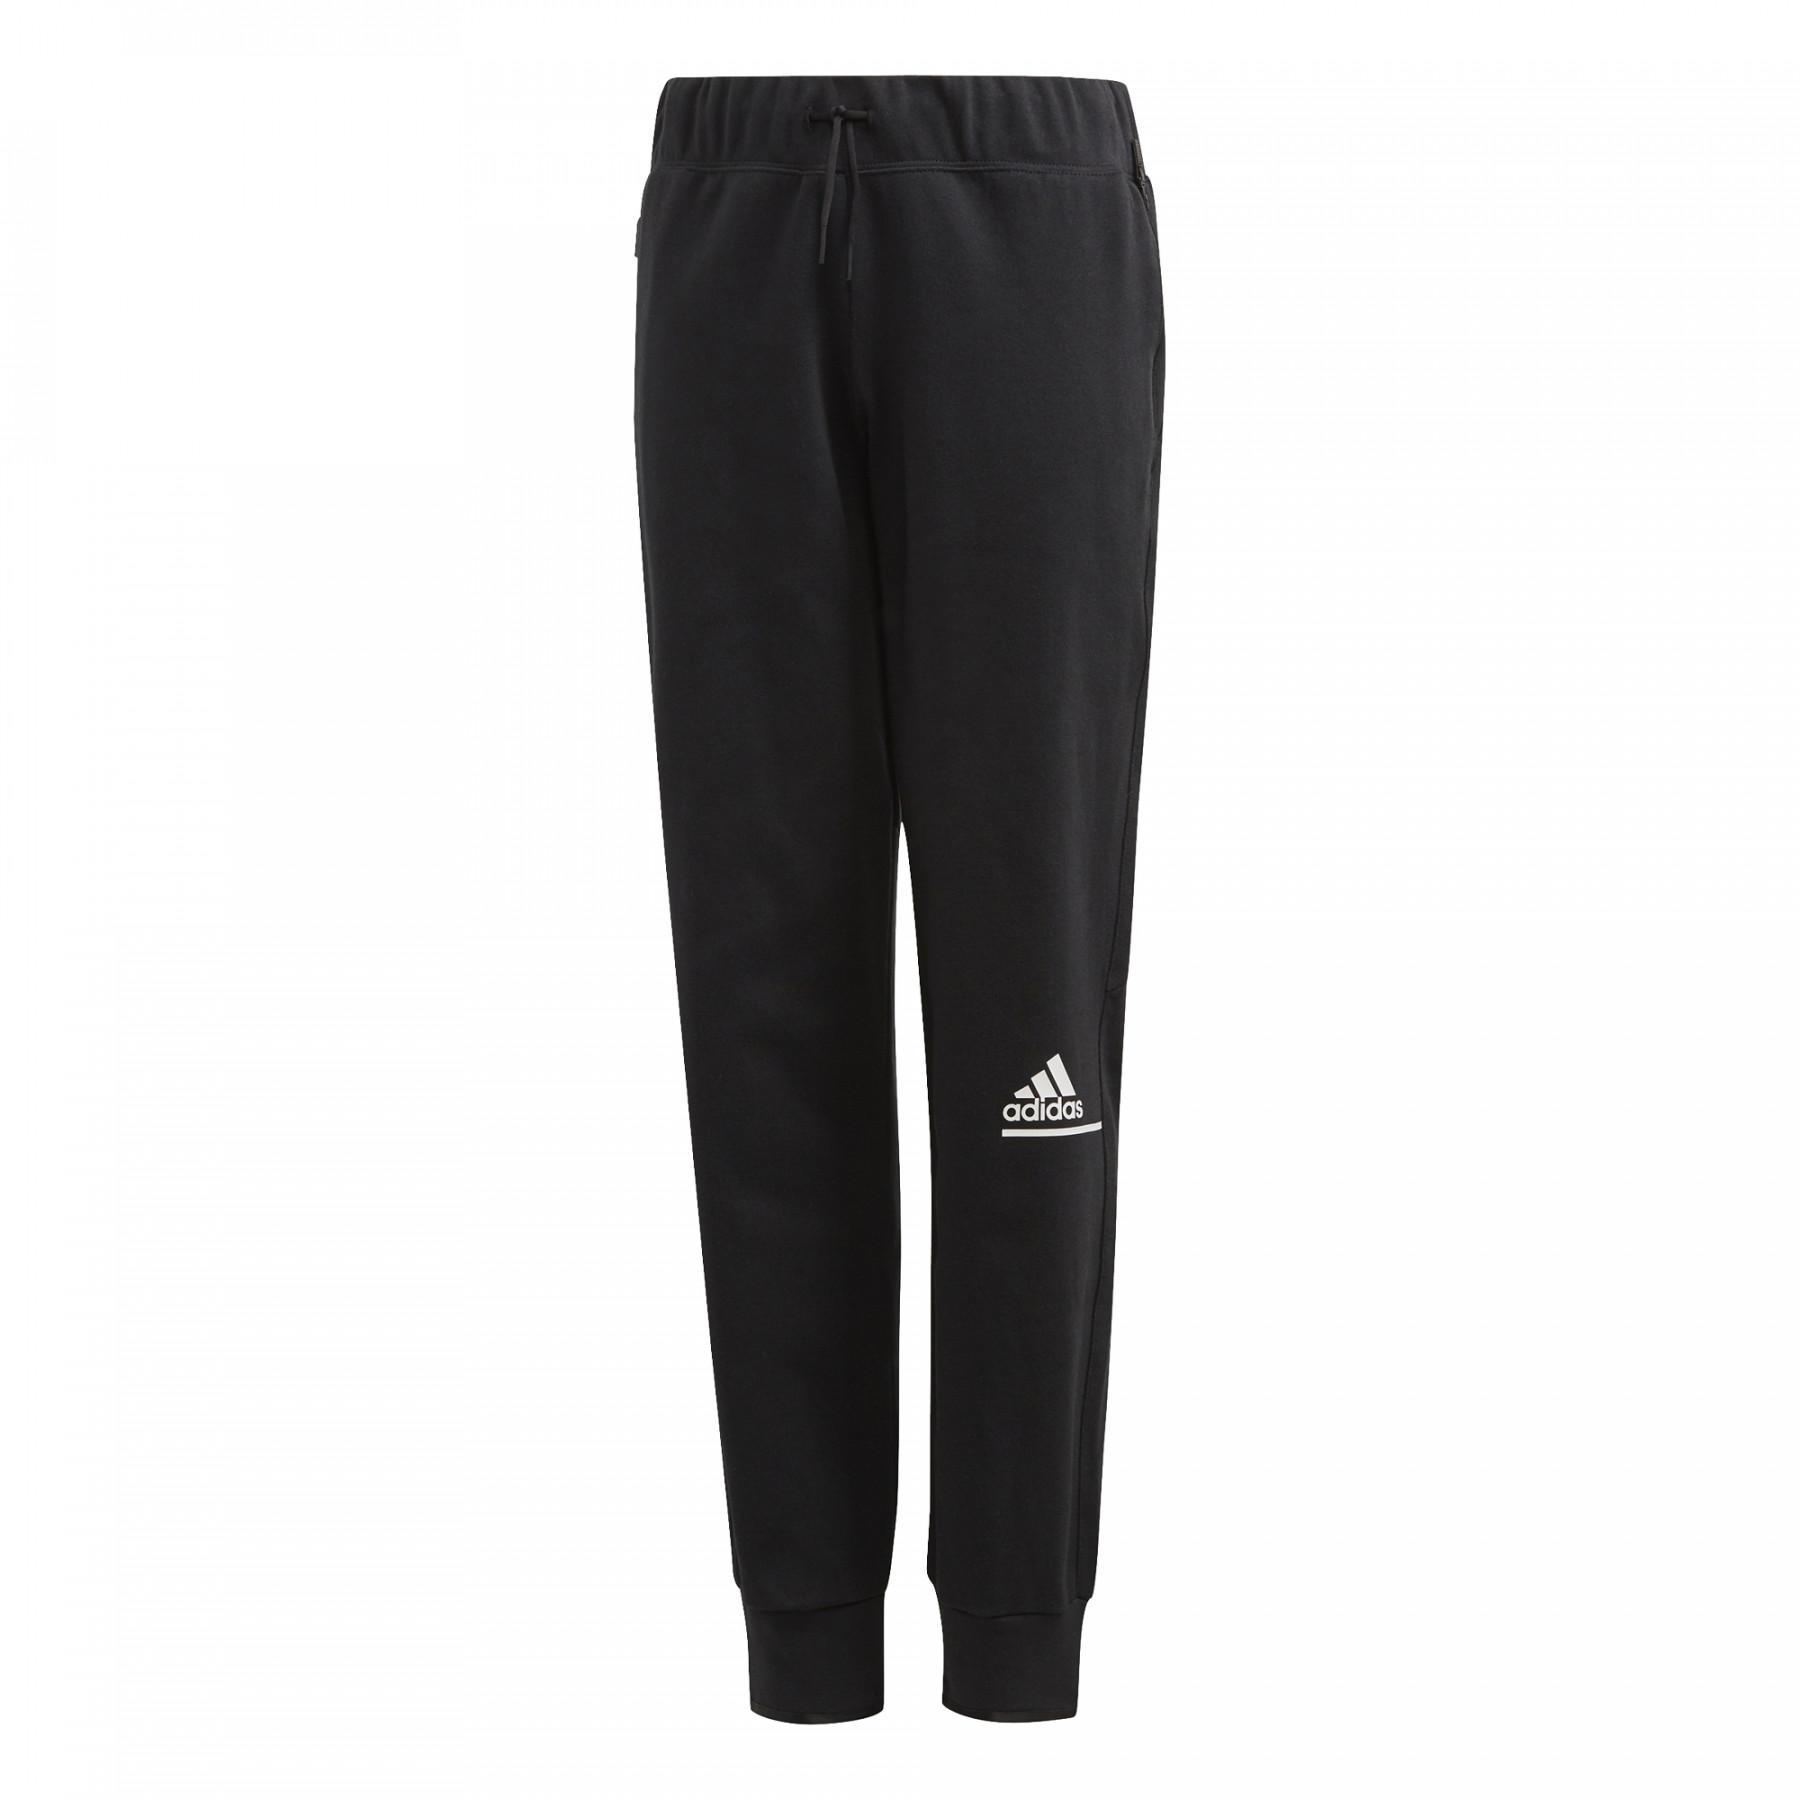 Children's trousers adidas Z.N.E. Relaxed